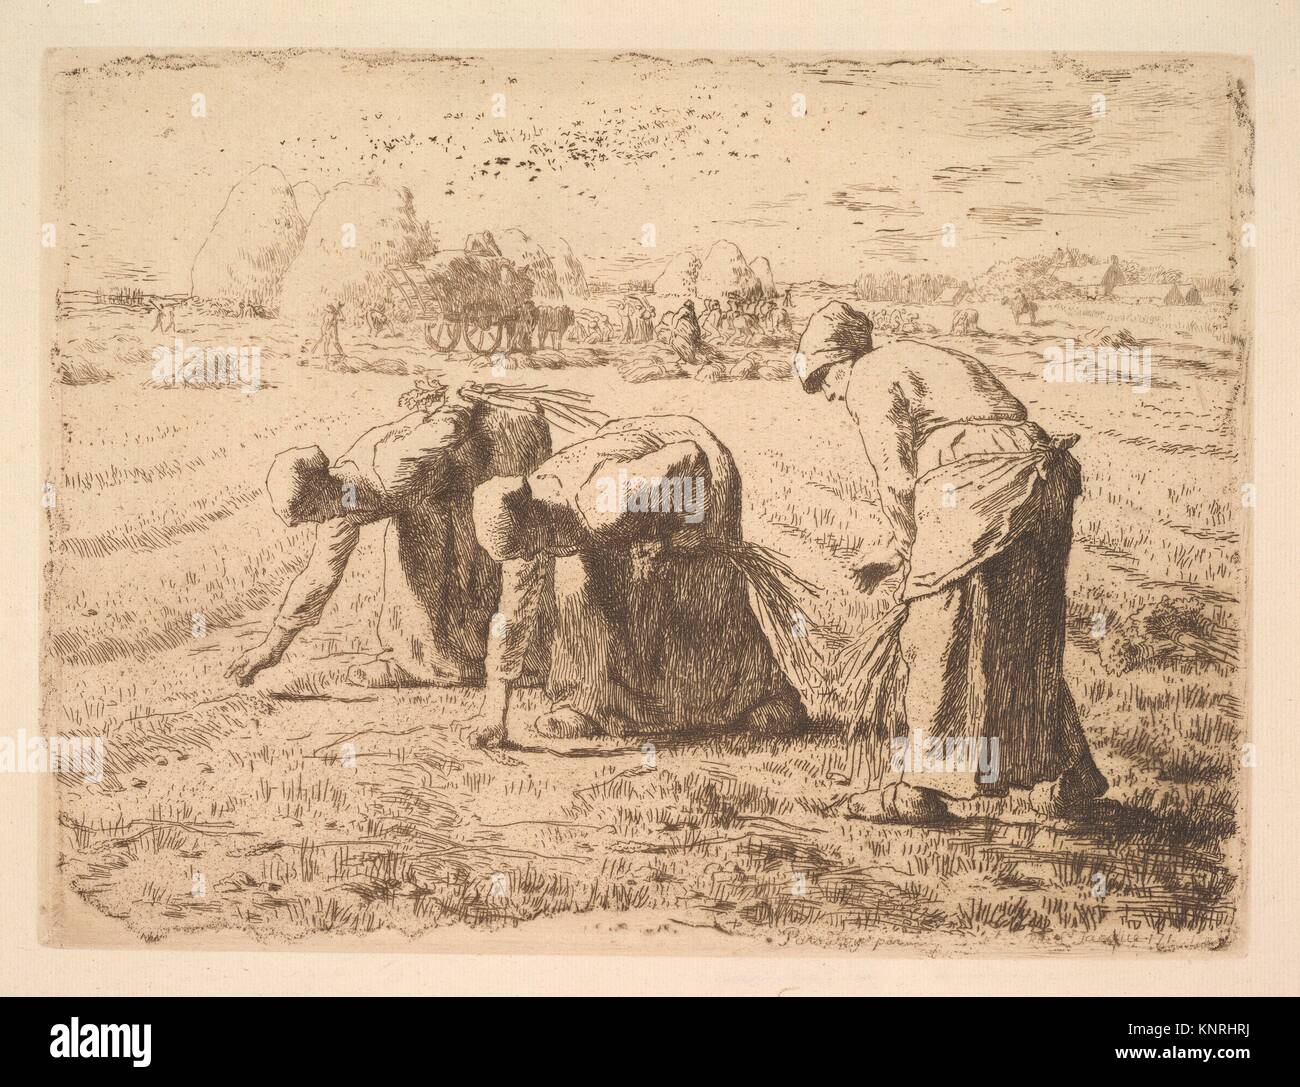 The Gleaners. Artist: Jean-François Millet (French, Gruchy 1814-1875 Barbizon); Date: 1834-75; Medium: Etching printed in brown/black ink on laid Stock Photo